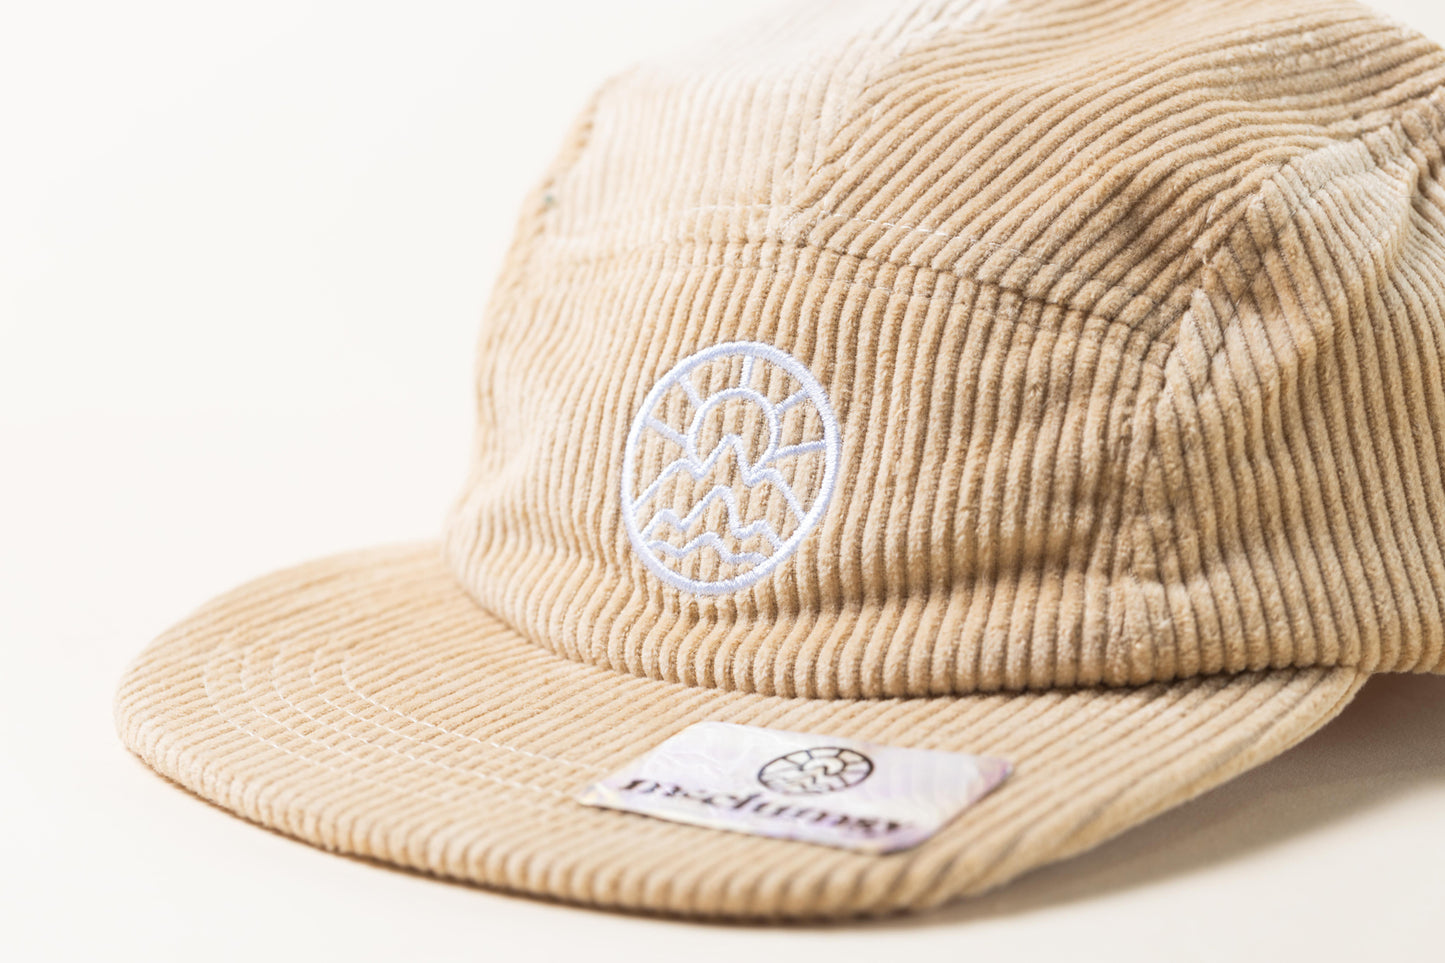 5 Panel Thick Whale Corduroy McClumsy Light Tan 5 Panel Hat with a white embroidered logo.